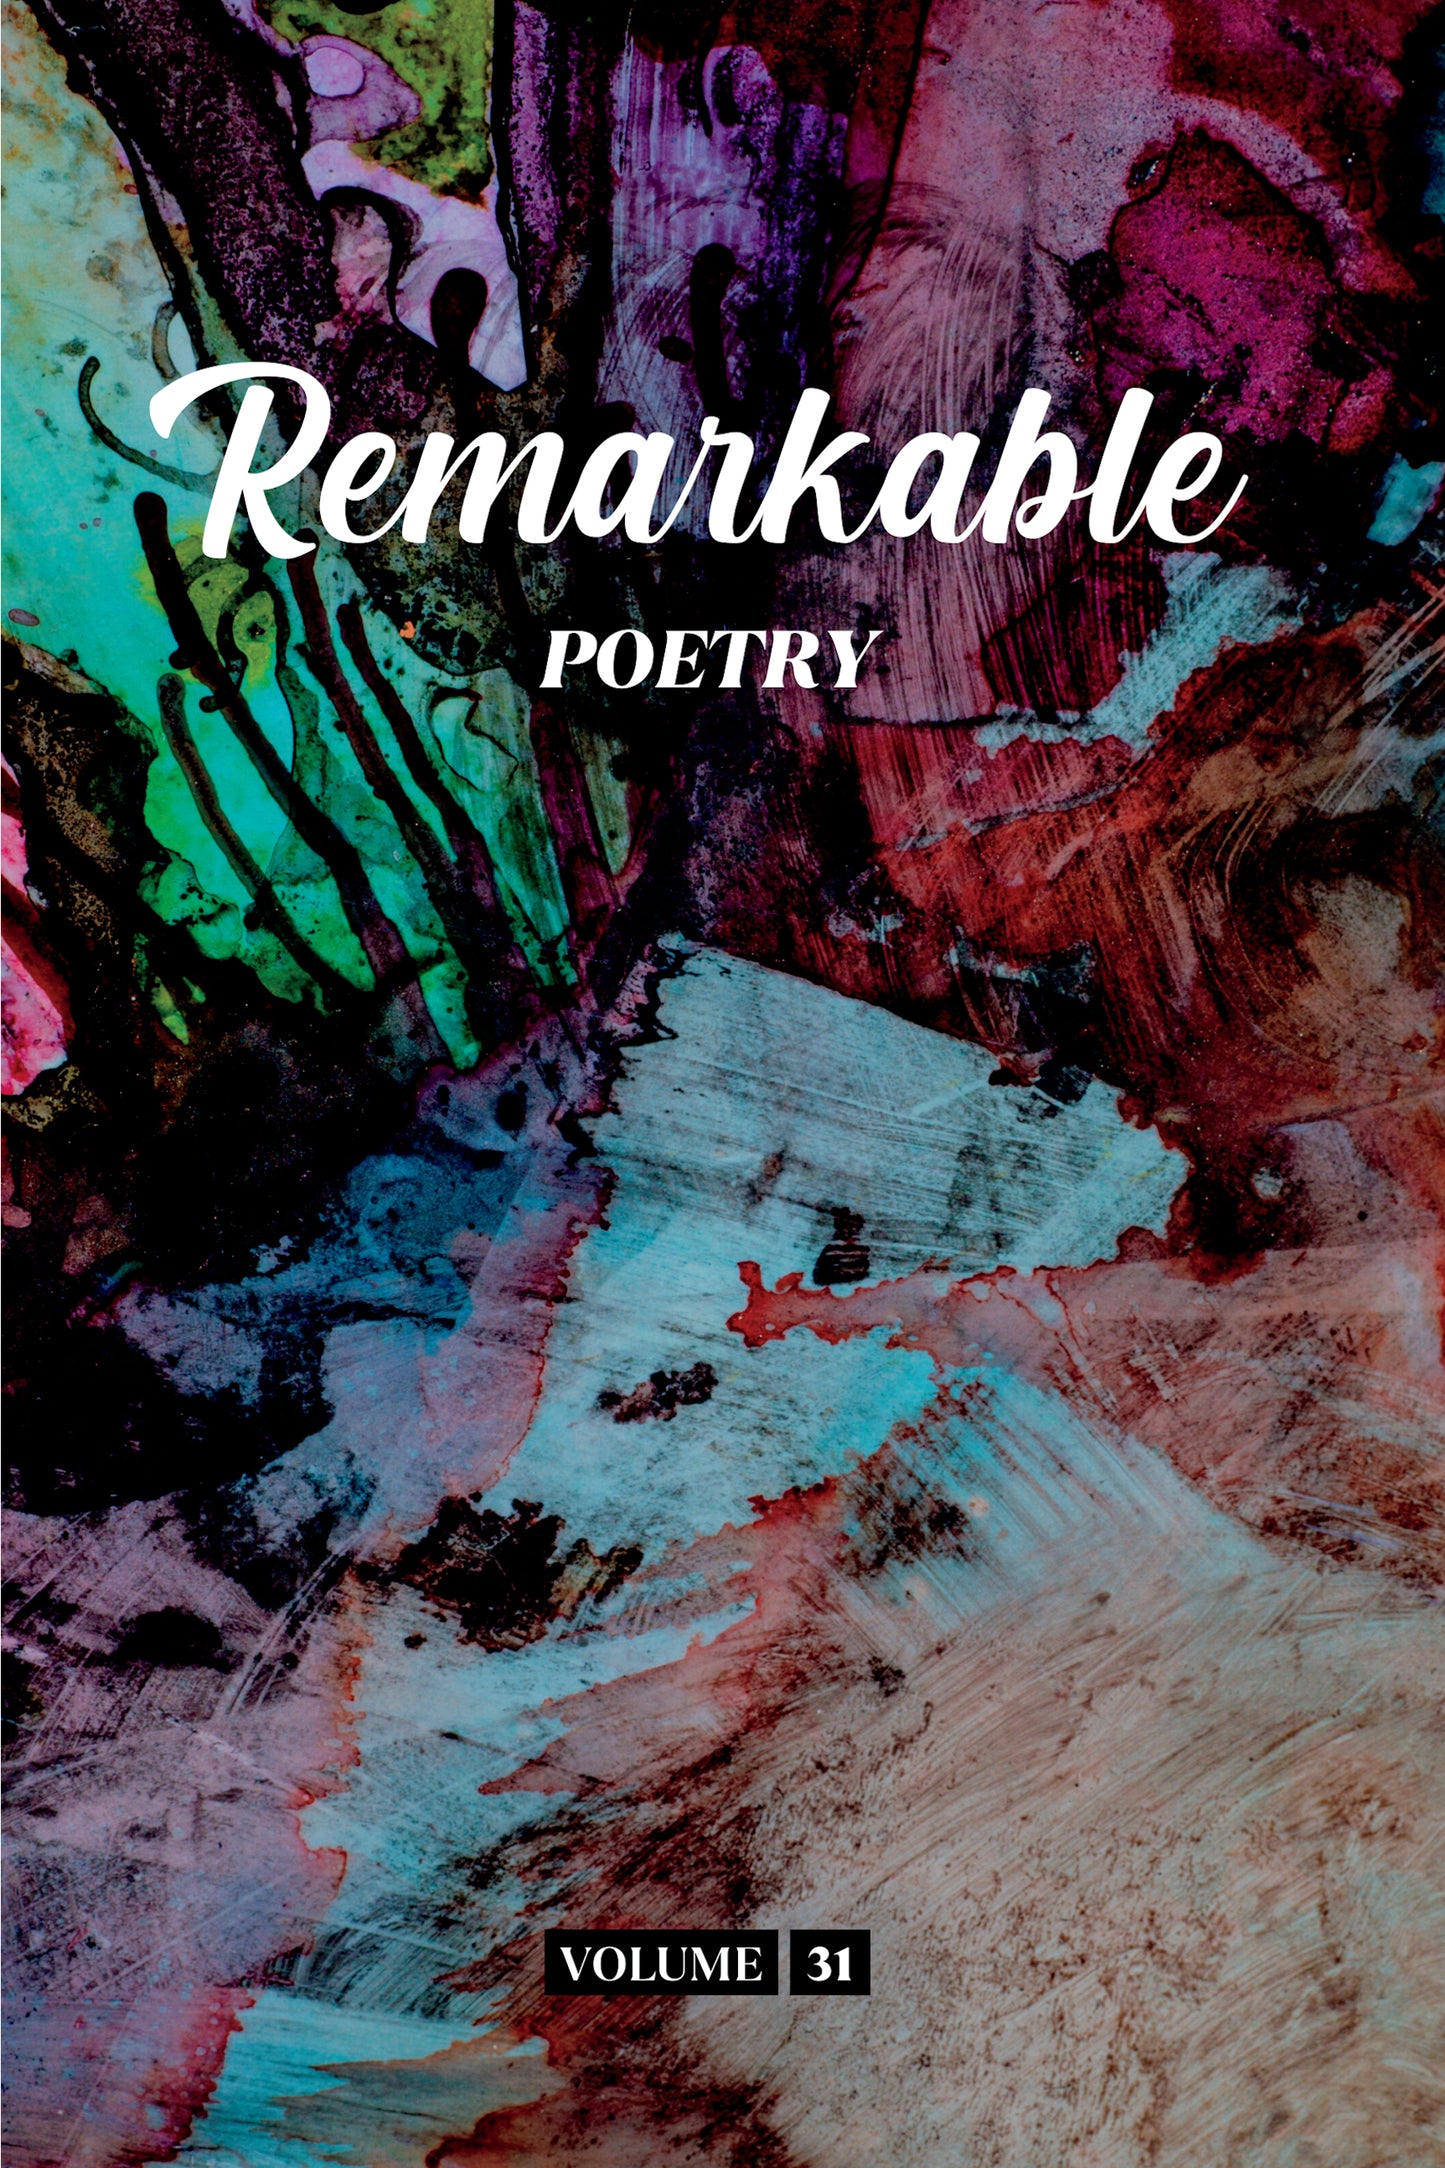 Remarkable Poetry (Volume 31) - Physical Book (Pre-Order)